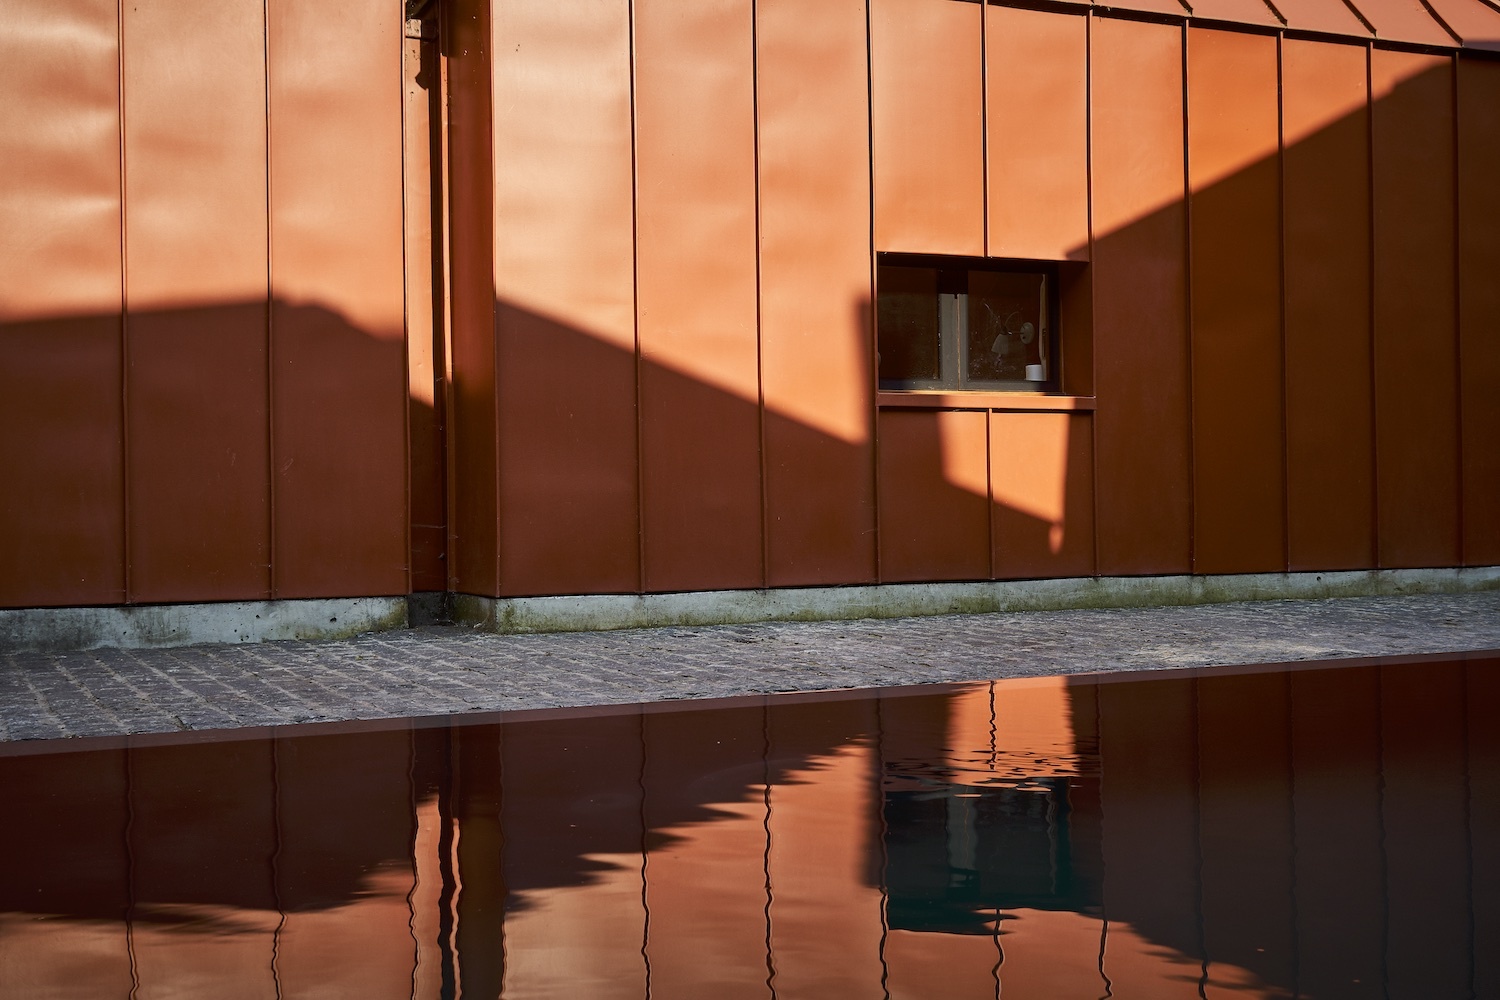 Metallic-orange-exterior-of-the-house-is-reflected-in-the-pool